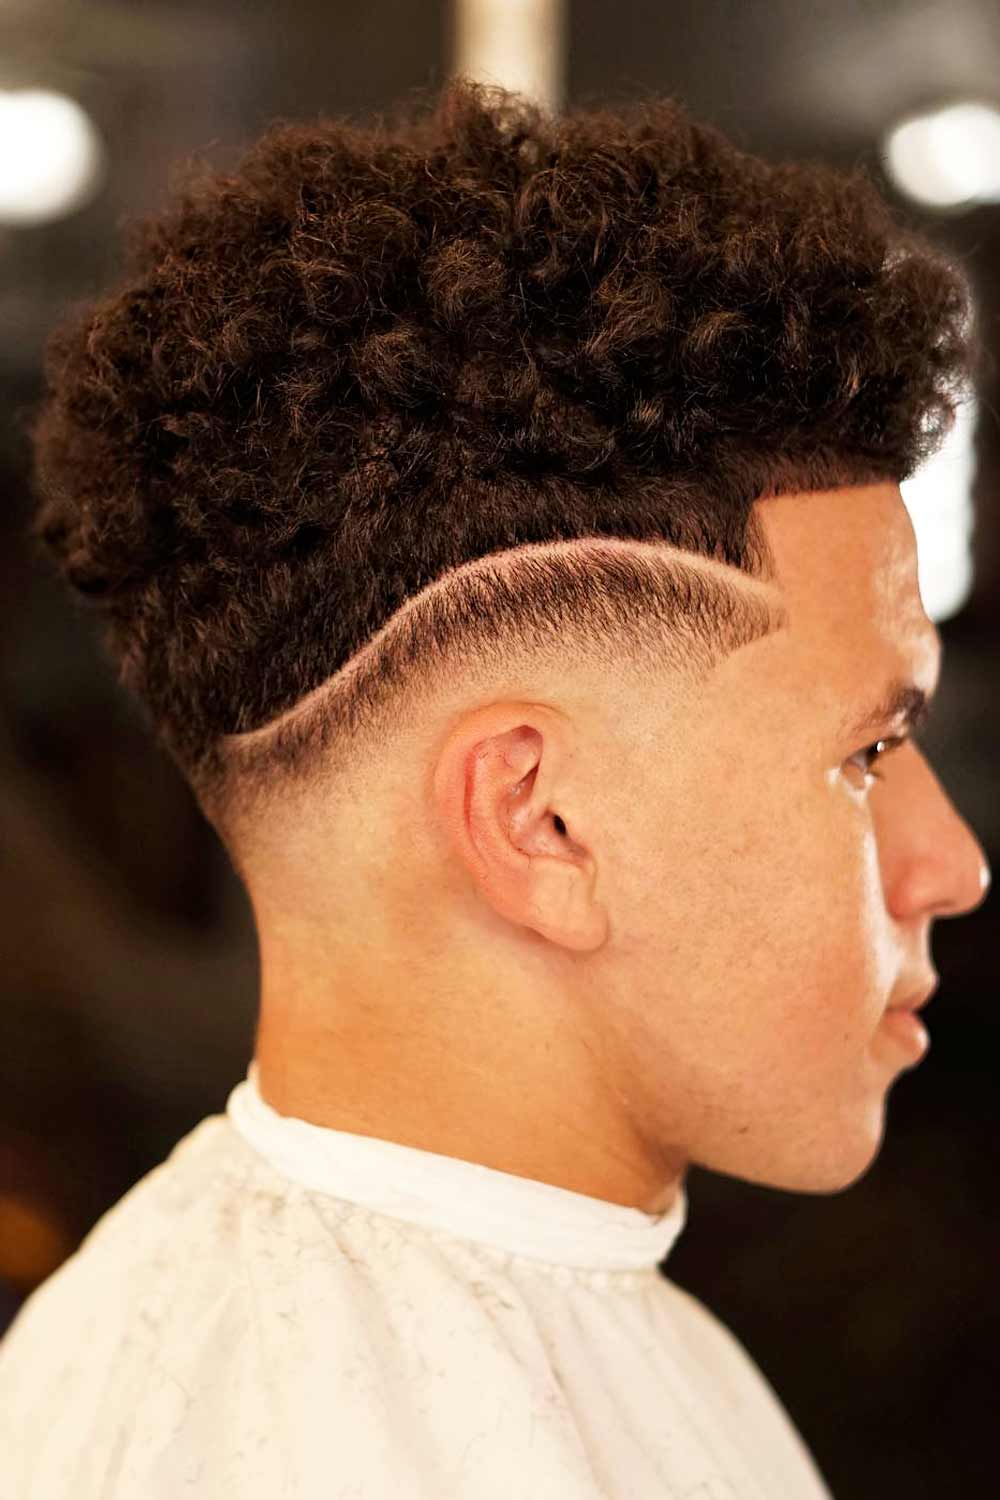 Curly Taper Fade with a Line #taperfadecurlyhair #taperfade #curlyhair #taper #fade